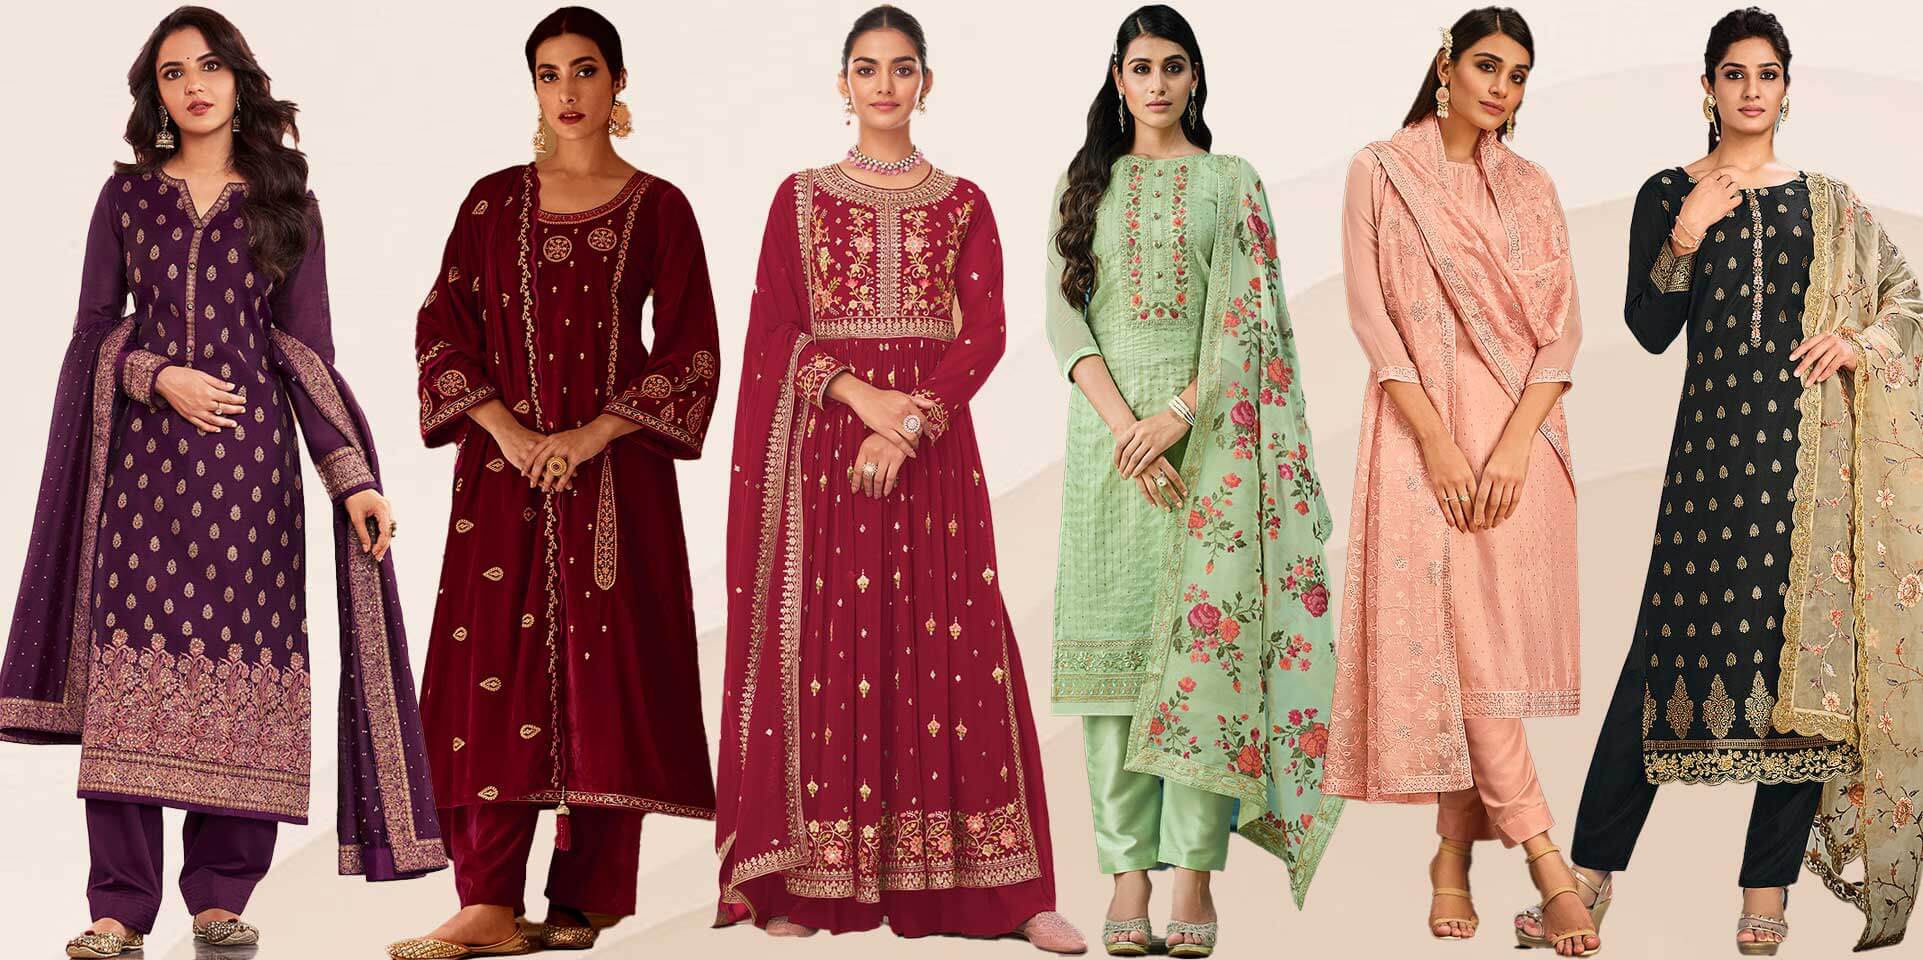 What Should I Wear with Salwar? Is Salwar a Business Casual?